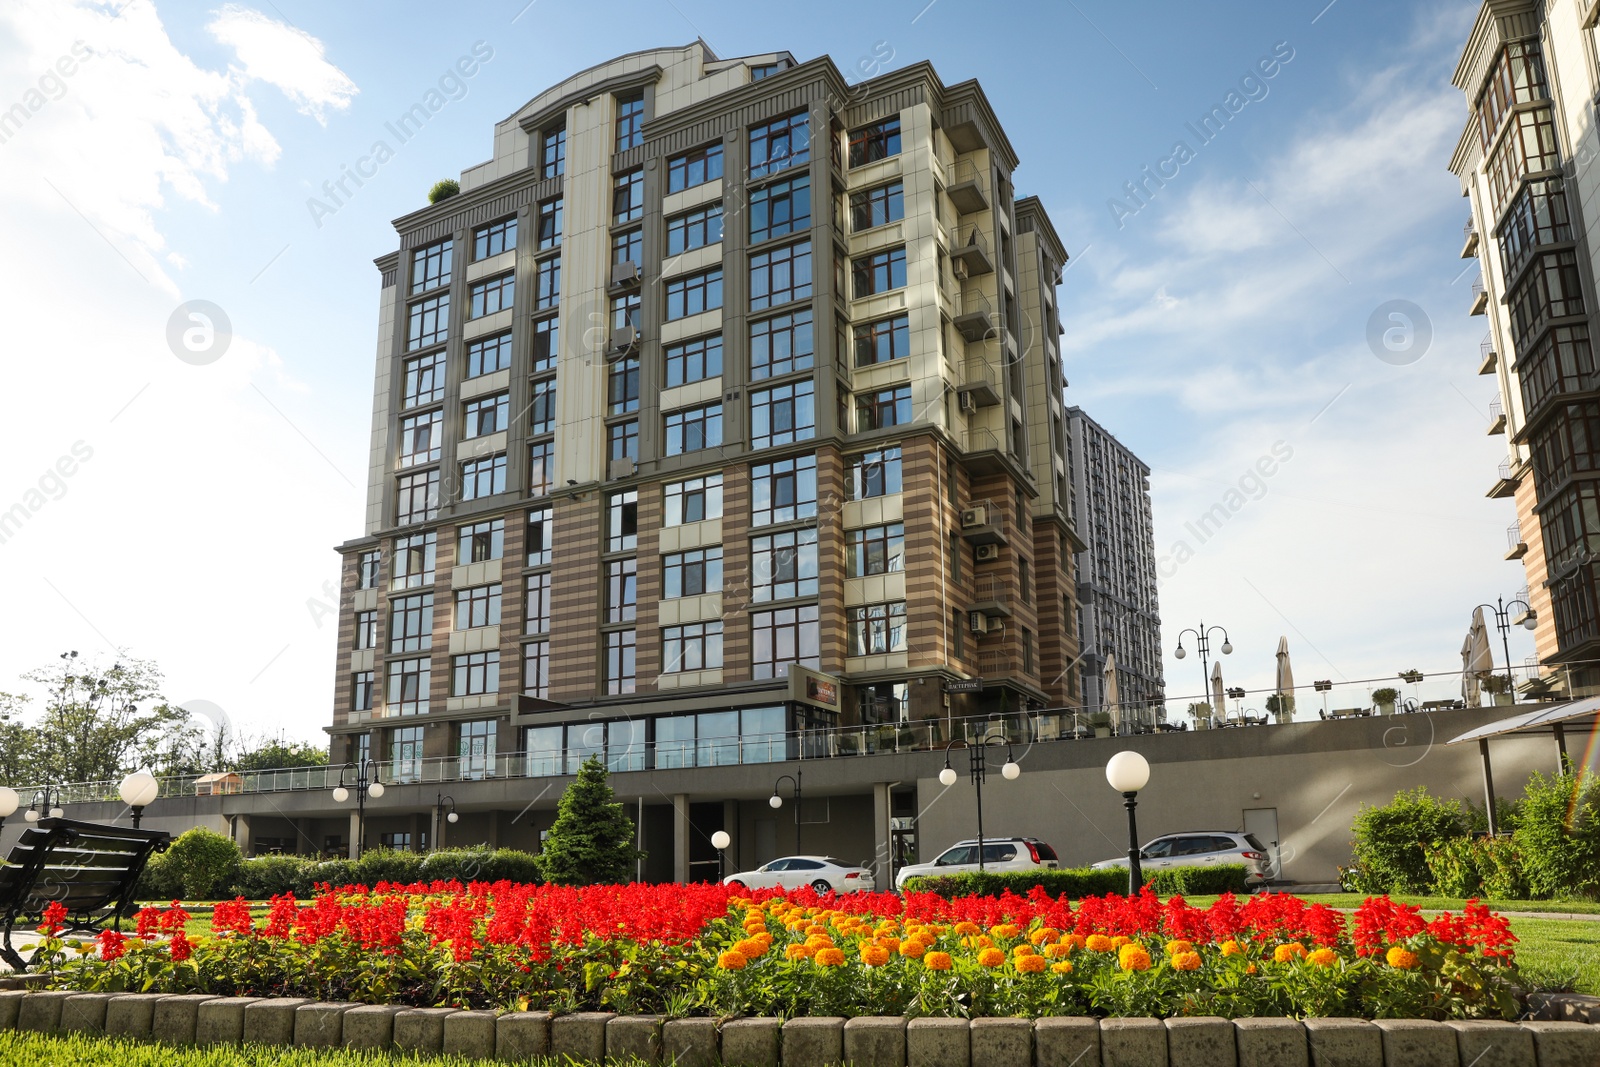 Photo of KYIV, UKRAINE - MAY 21, 2019: Beautiful view of modern housing estate in Pecherskyi district on sunny day